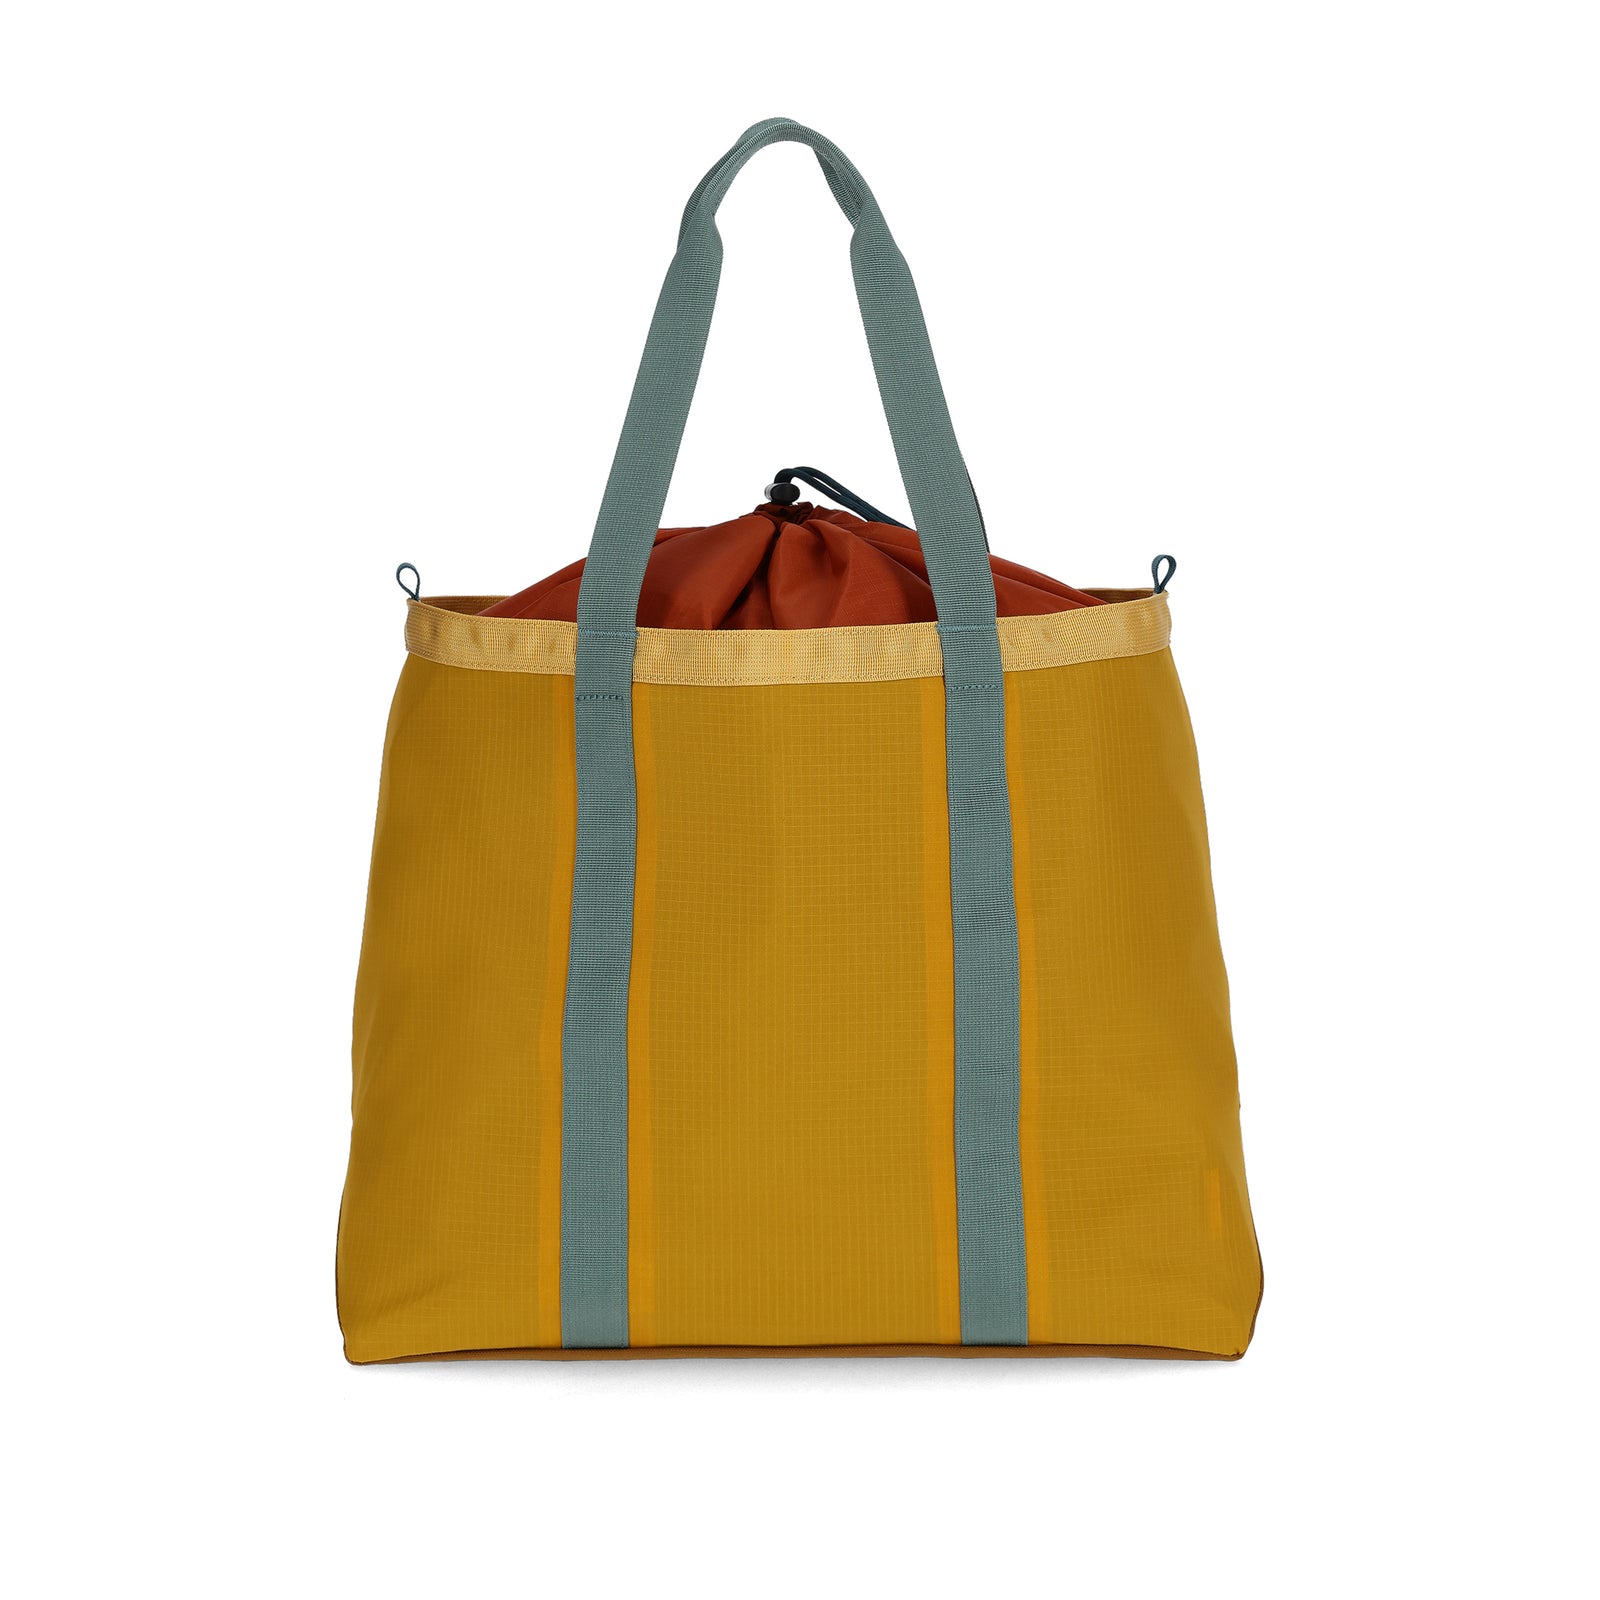 Back View of Topo Designs Mountain Utility Tote in "Mustard / Black"